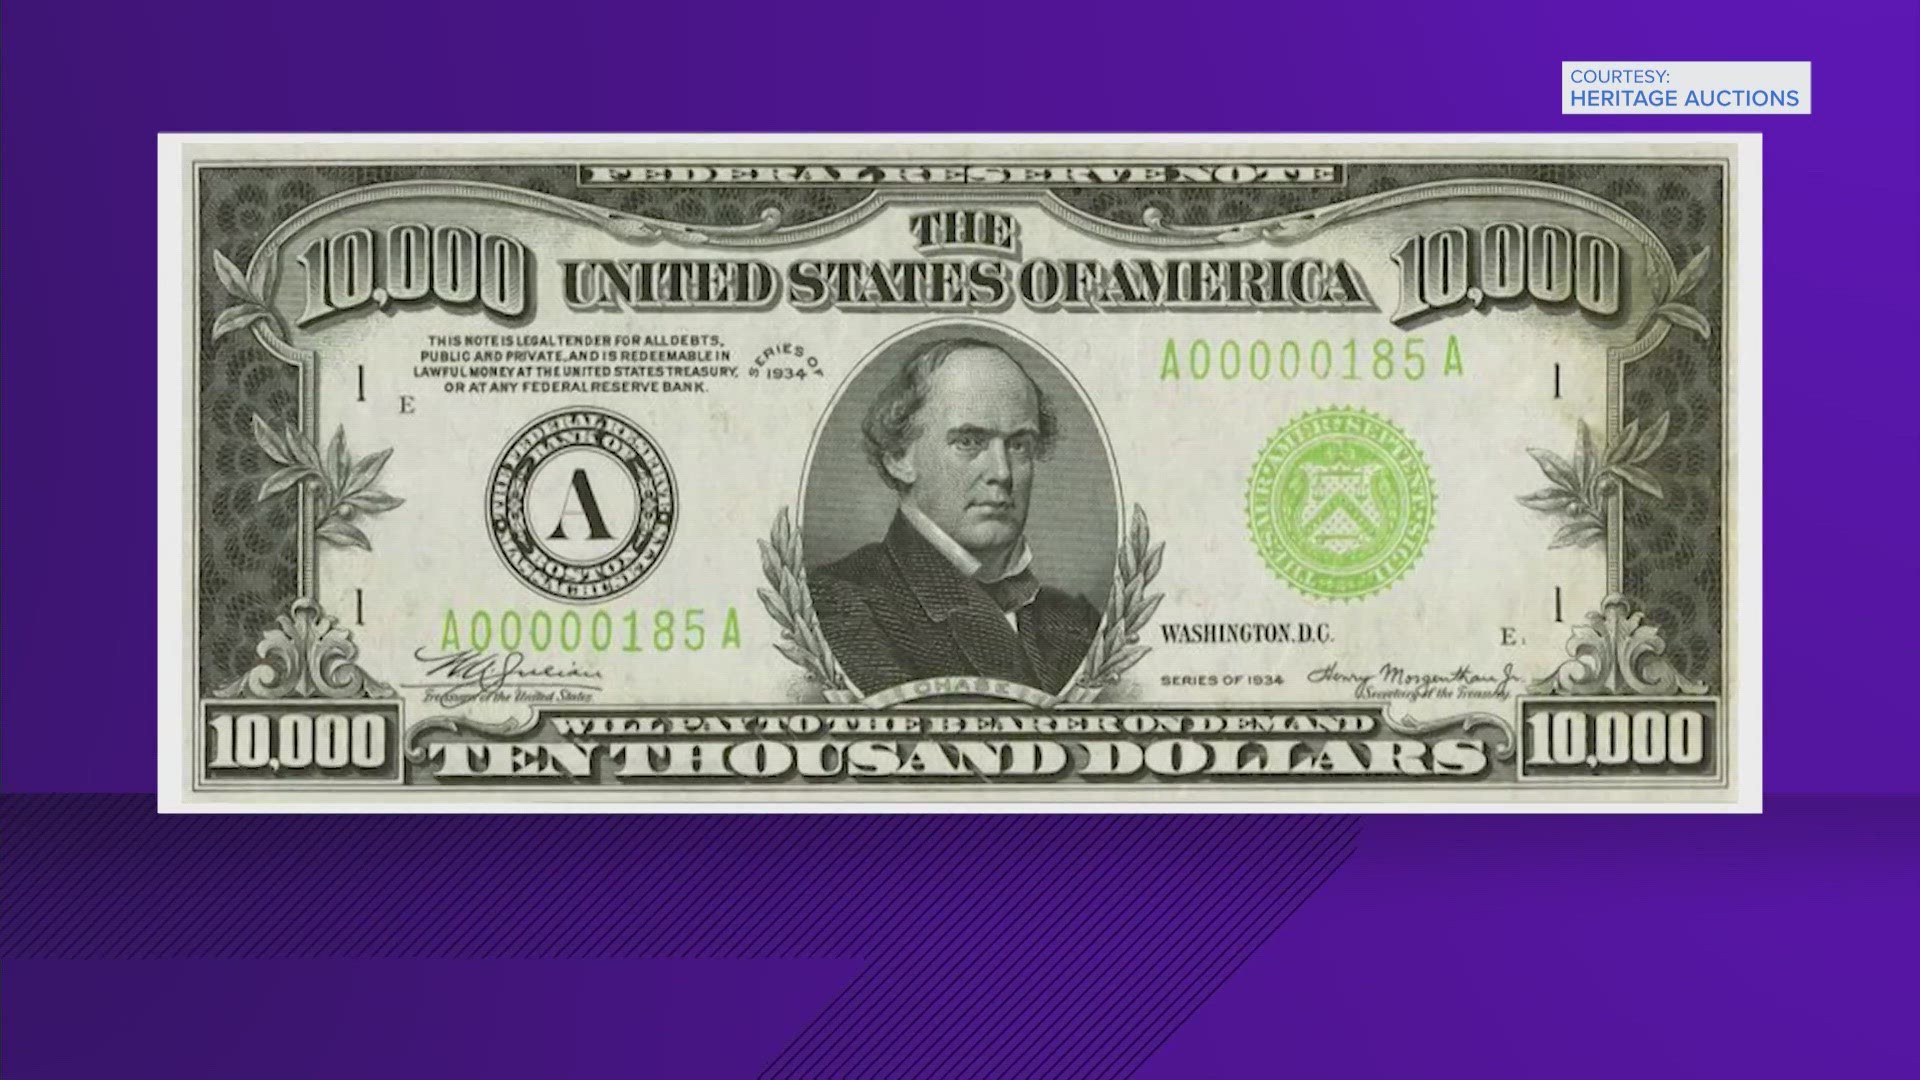 This one went for $480,000 at auction!  Since 1969, the $100 bill is the highest denomimation.